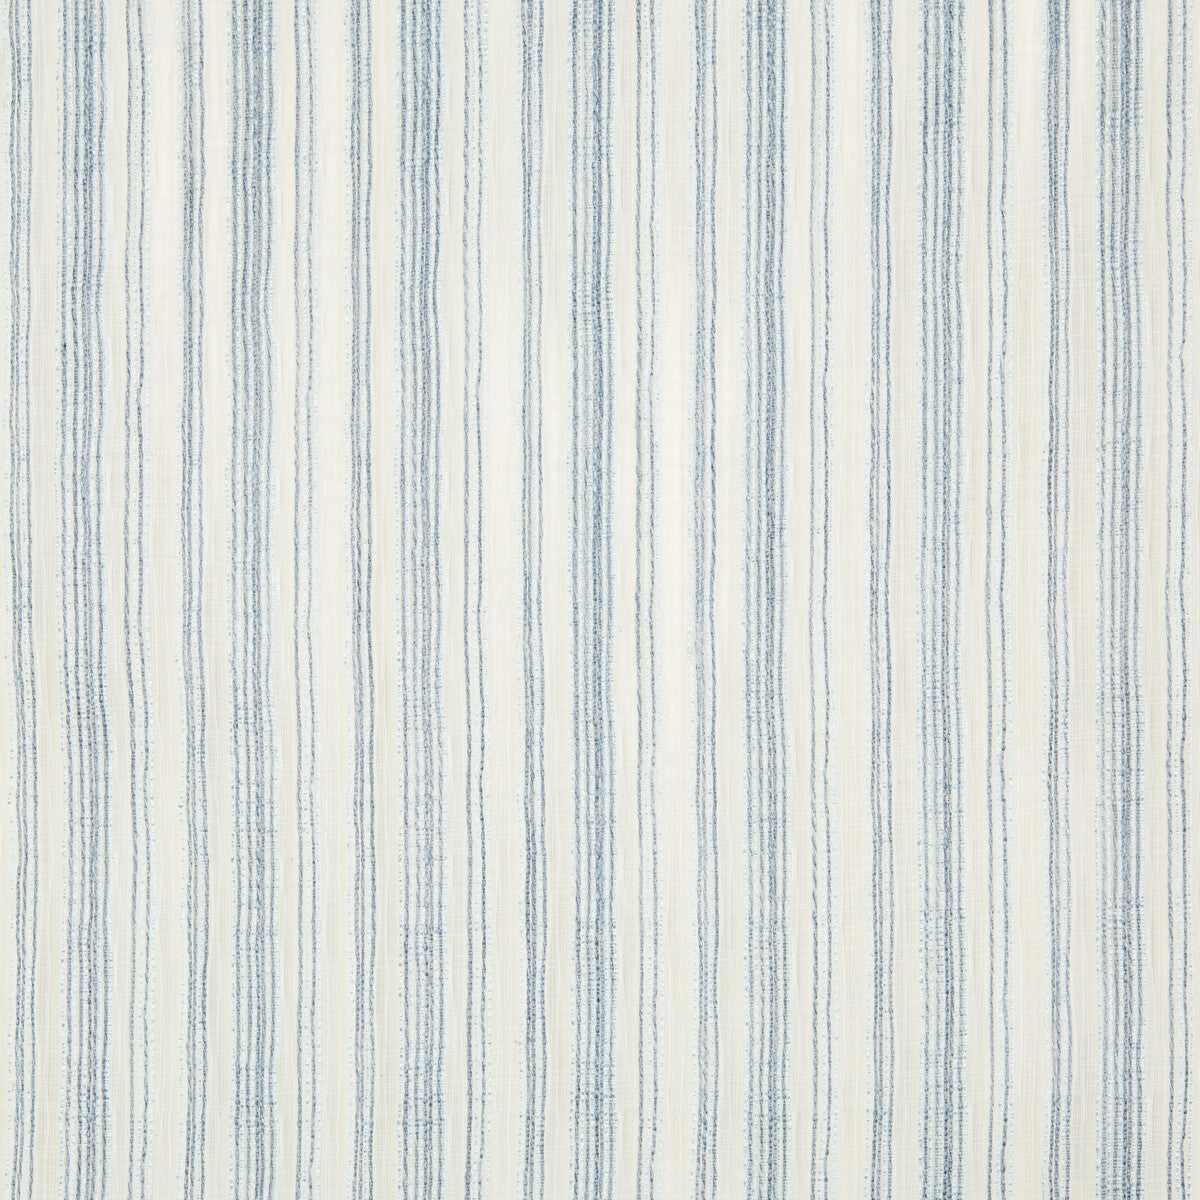 Coasting fabric in blue pearl color - pattern 4785.15.0 - by Kravet Contract in the Kravet Cruise collection